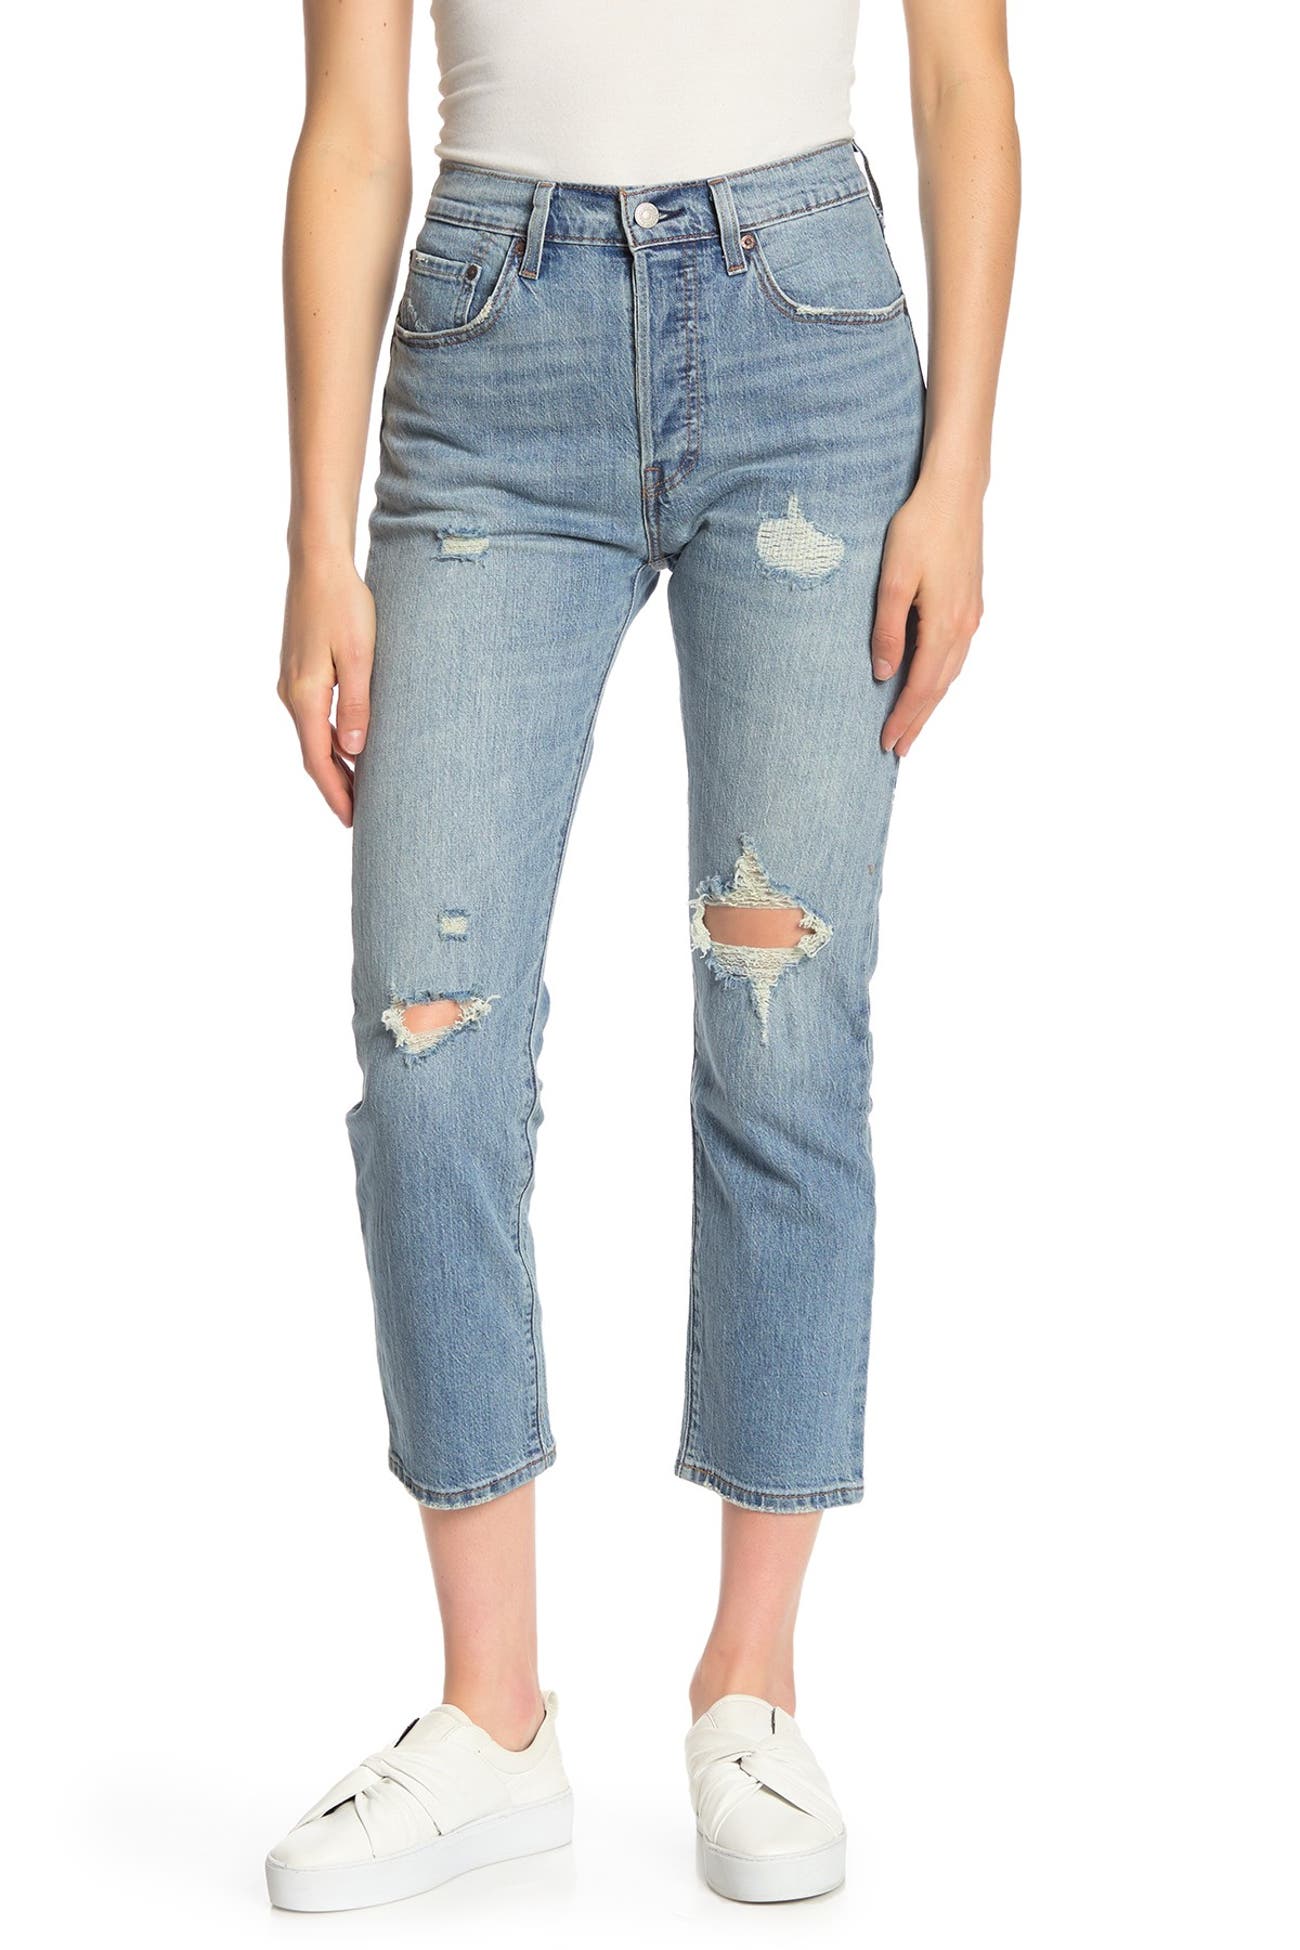 Levi's | 508 Distressed Cropped Jeans | Nordstrom Rack